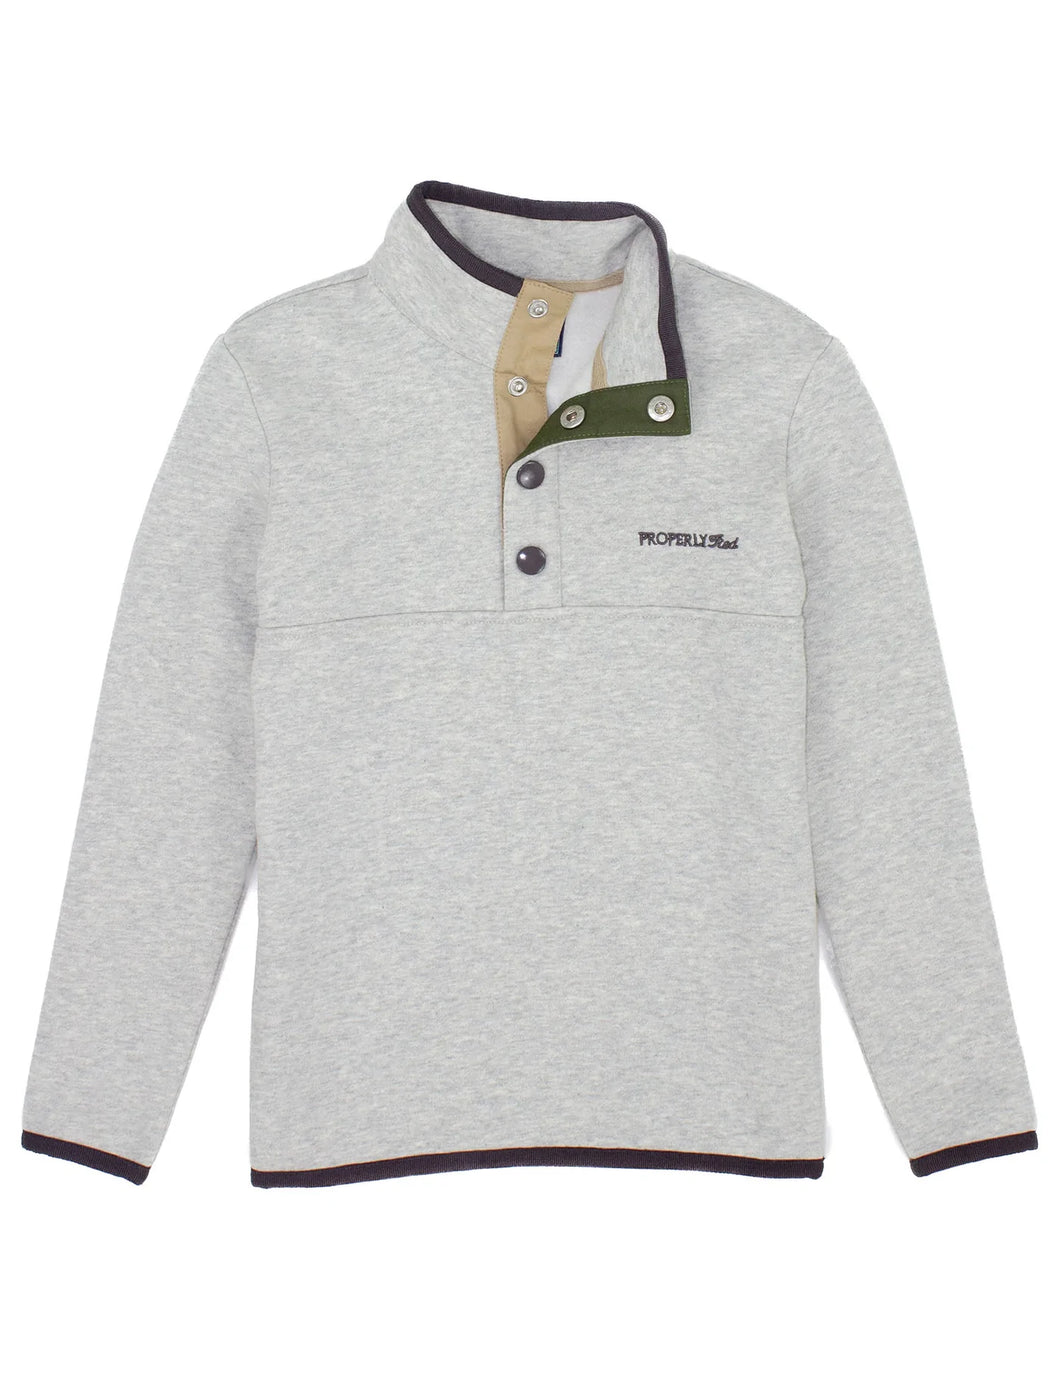 PROPERLY Tied - Carter Pullover -Heather Grey